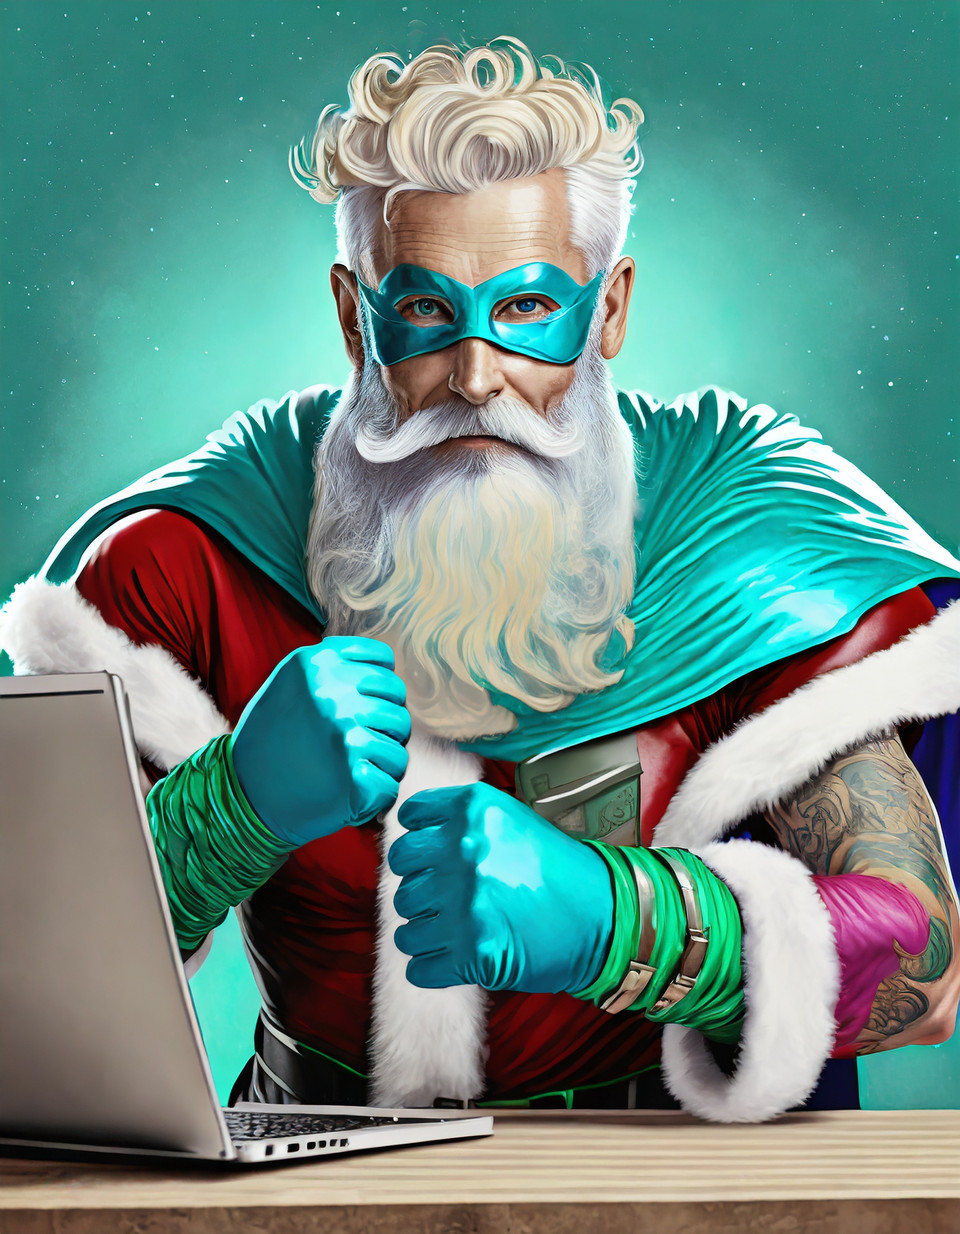 Tattooed superhero Santa Claus with turquoise beard and hair and turquoise cap, sitting in front of a laptop